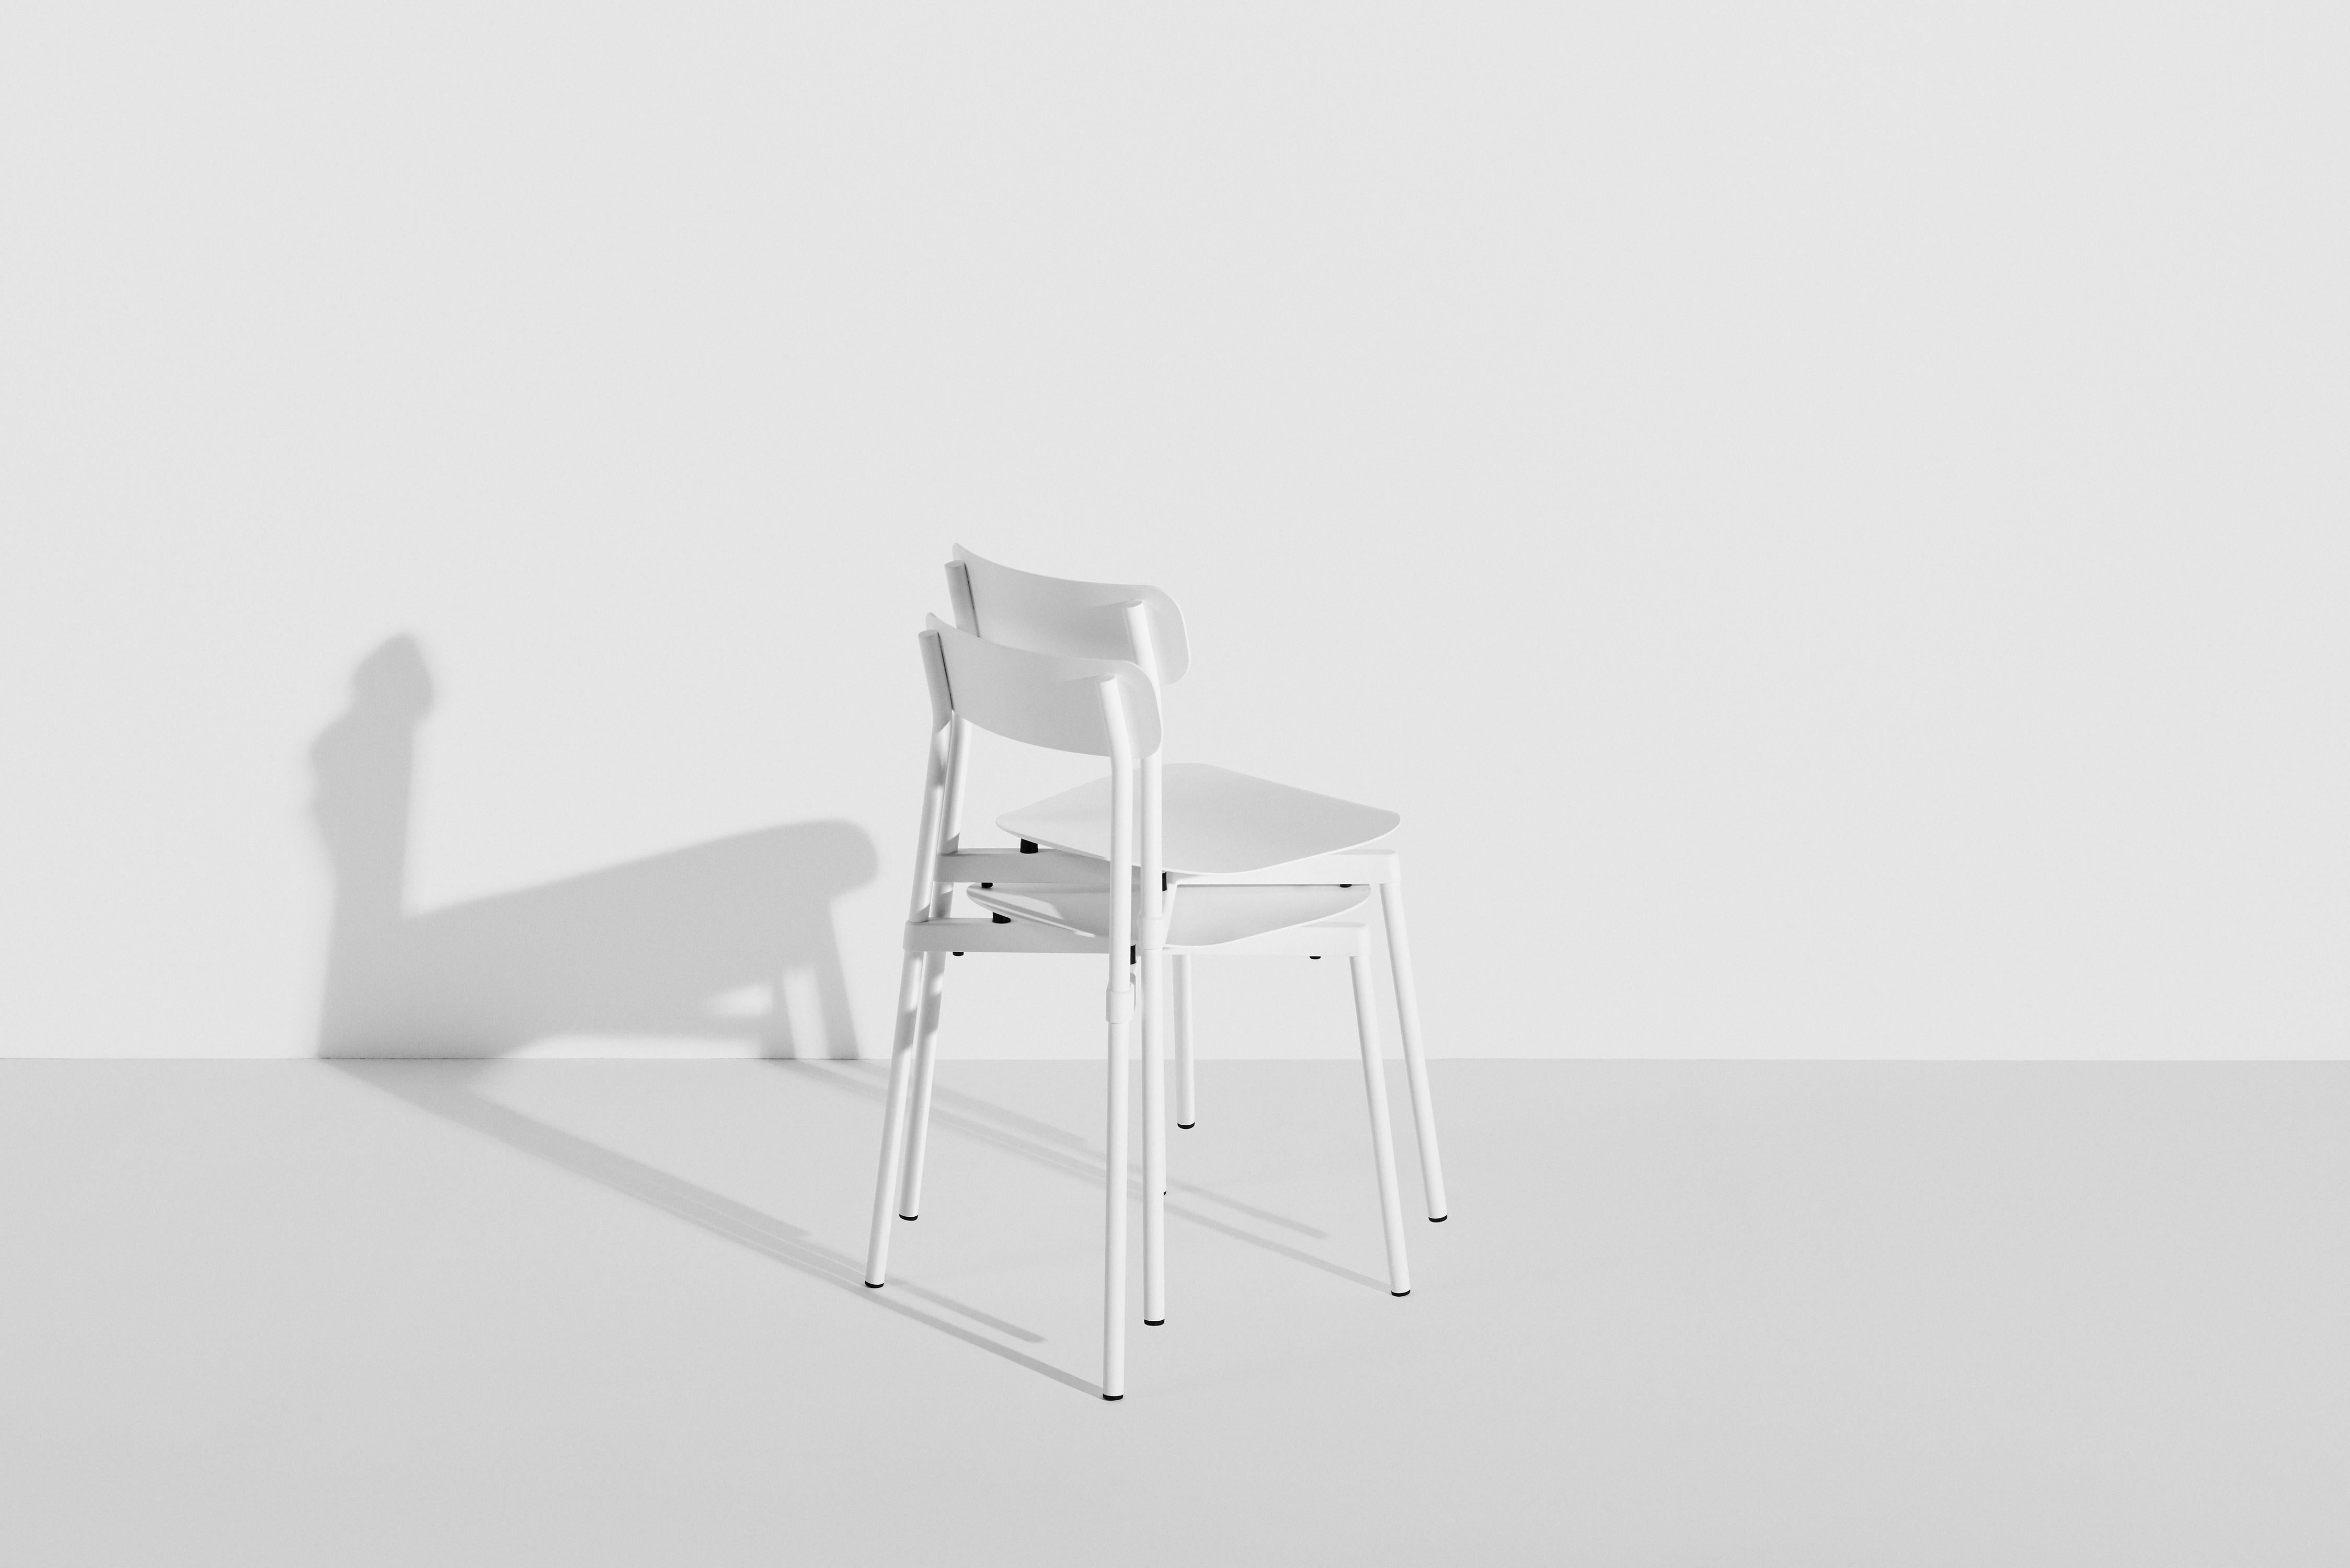 Contemporary Petite Friture Fromme Chair in White Aluminium by Tom Chung, 2019 For Sale